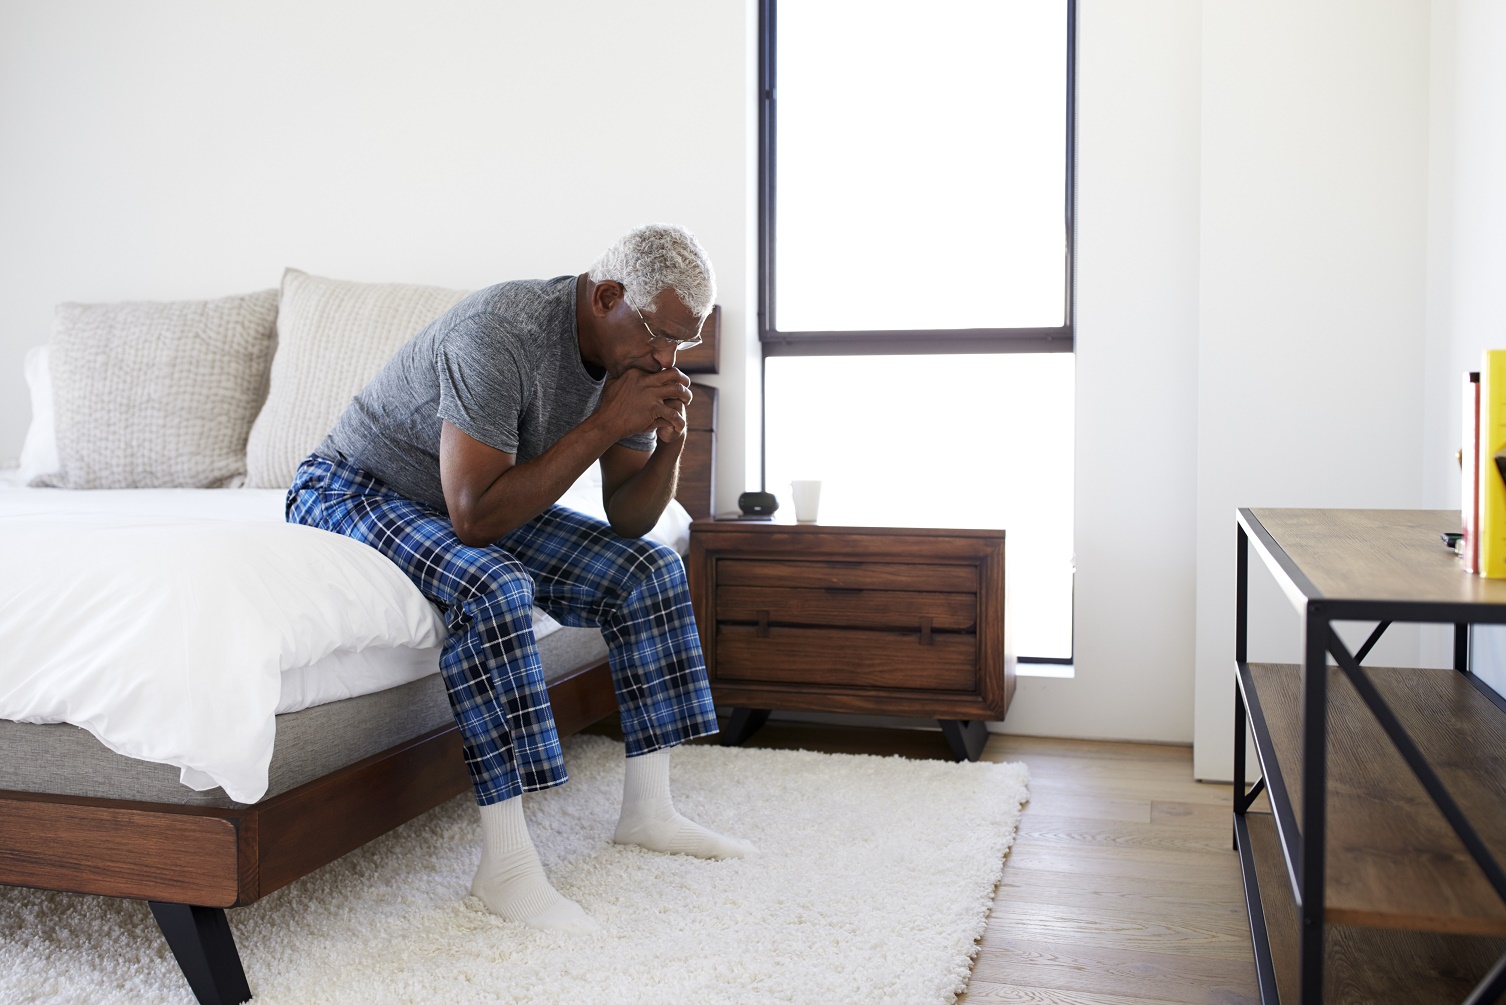 Don’t fall for the façade Loneliness affects older men too